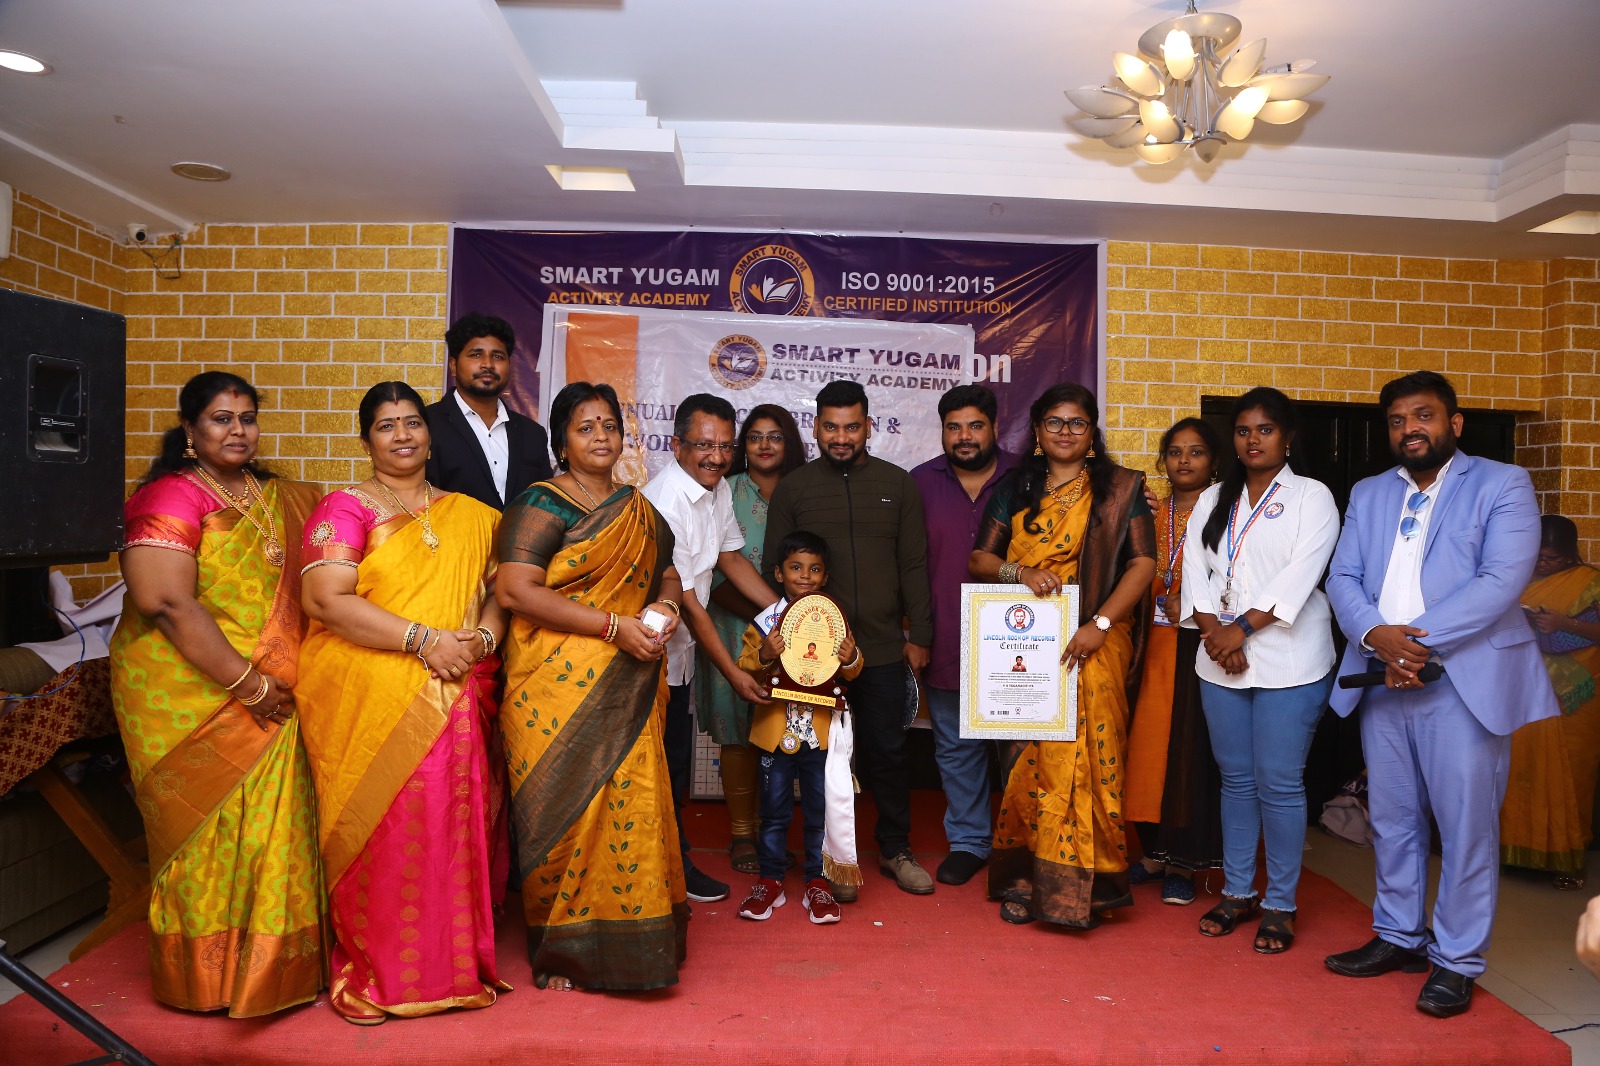 World record by arranging 156 number of 2*2 Rubik's Cube in the   formation of Bharathiyar 's face under the theme of "ROWTHIRAM PAZHAGU"  by reciting Bharathiyar 's Puthiya Aathichudi SIMULTANEOUSLy in least time.